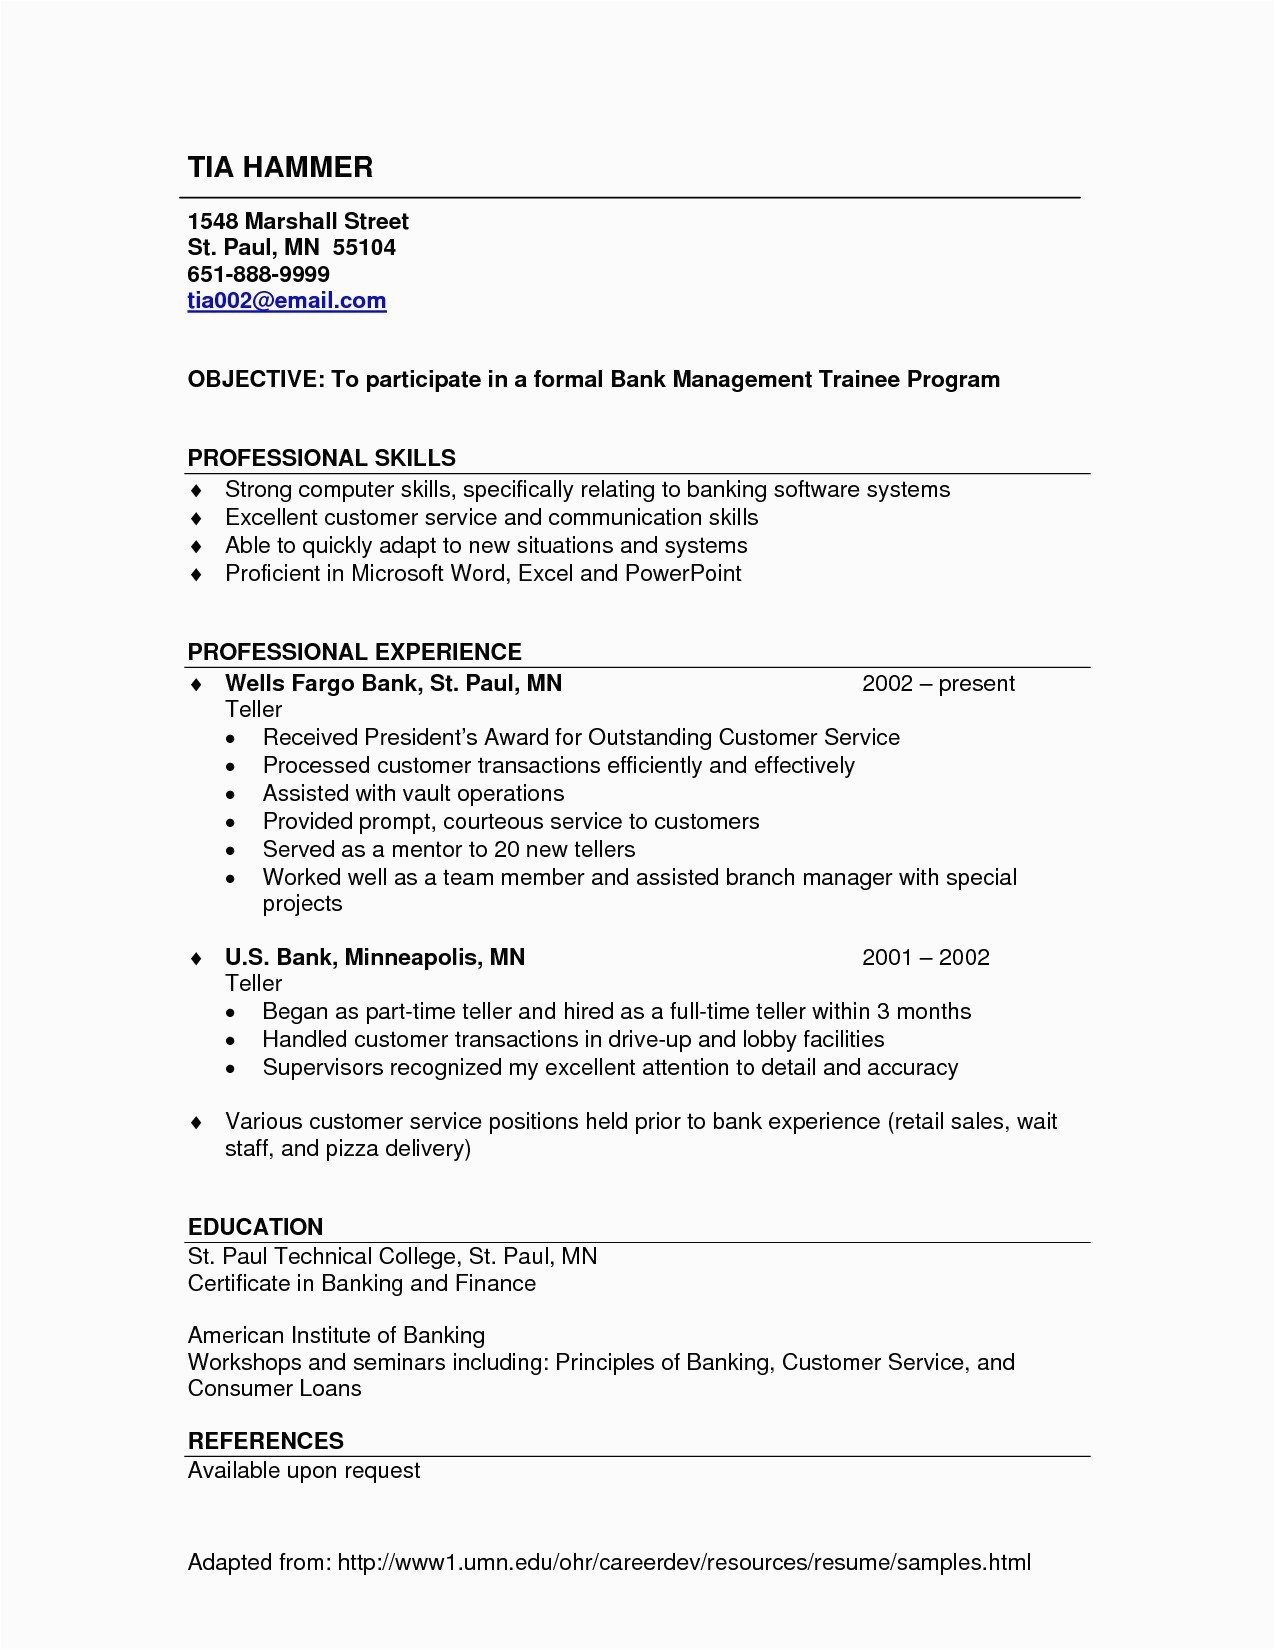 Sample Resume with Awards and Recognition Awards and Recognition Resume Sample Best Resume Examples